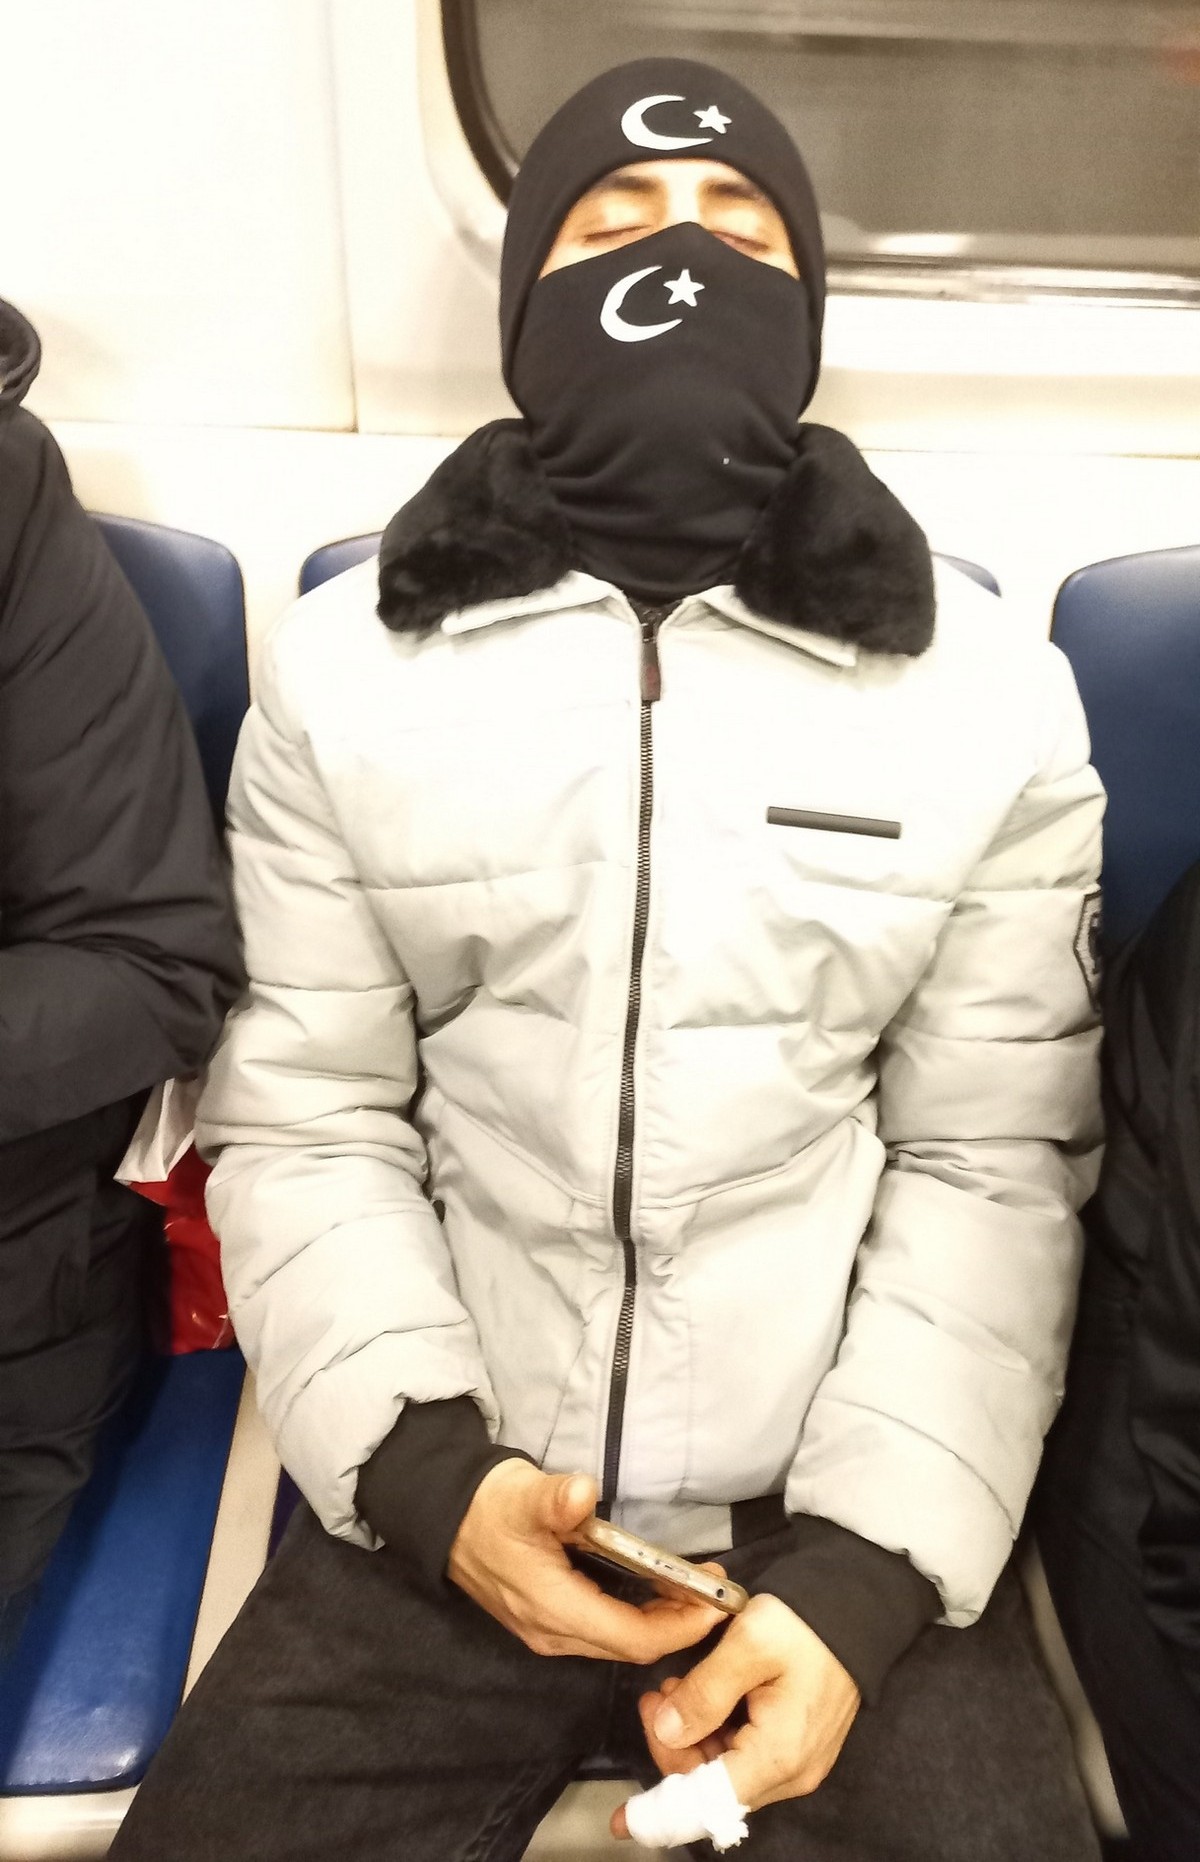 Strange People In The Subway, part 29